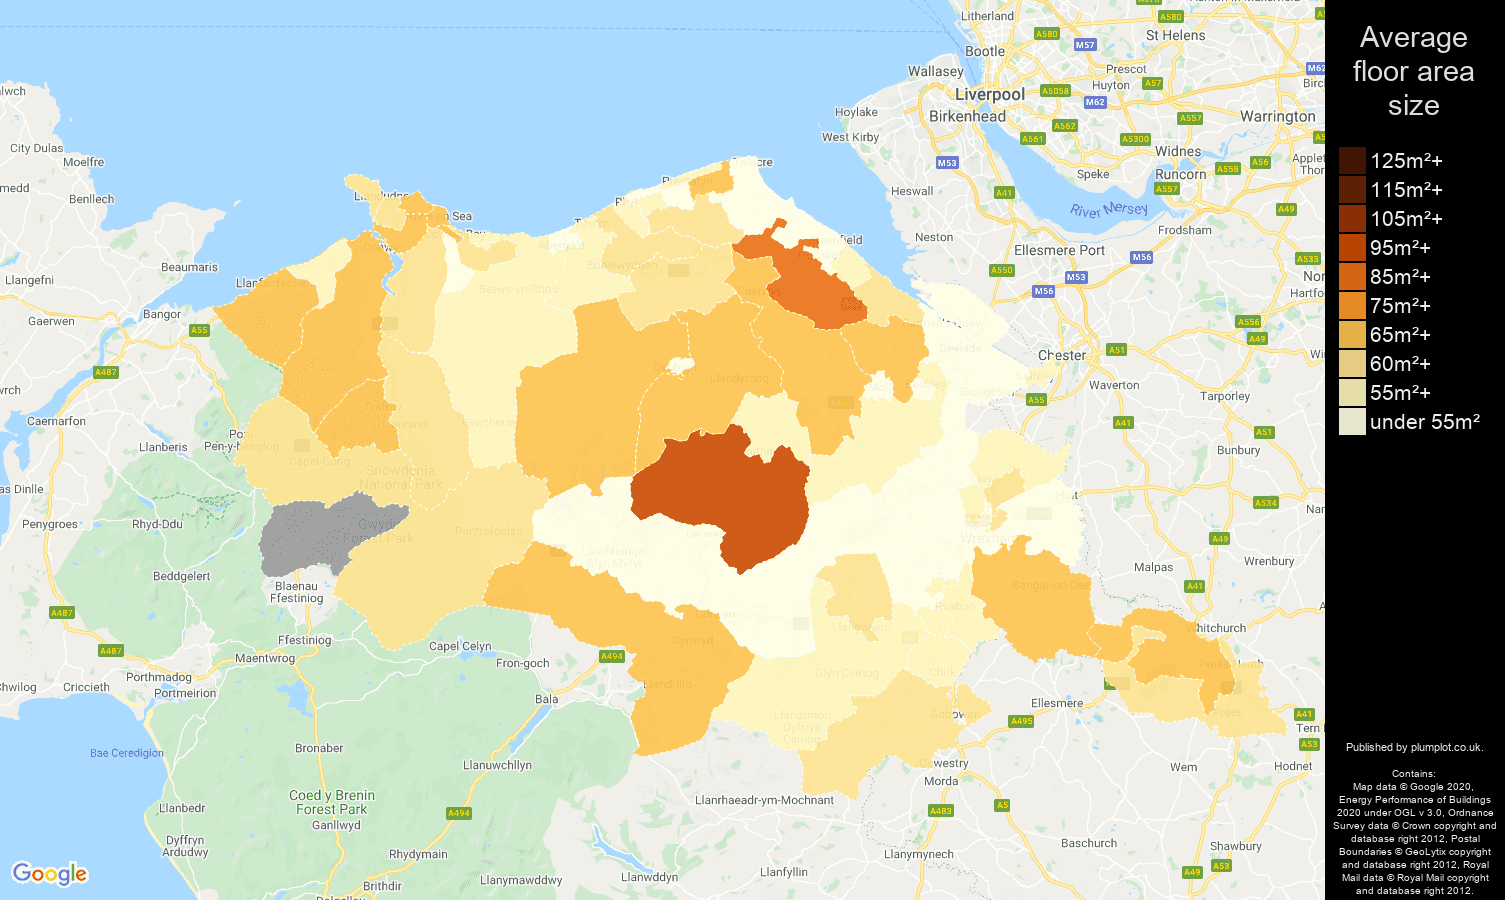 Clwyd map of average floor area size of flats